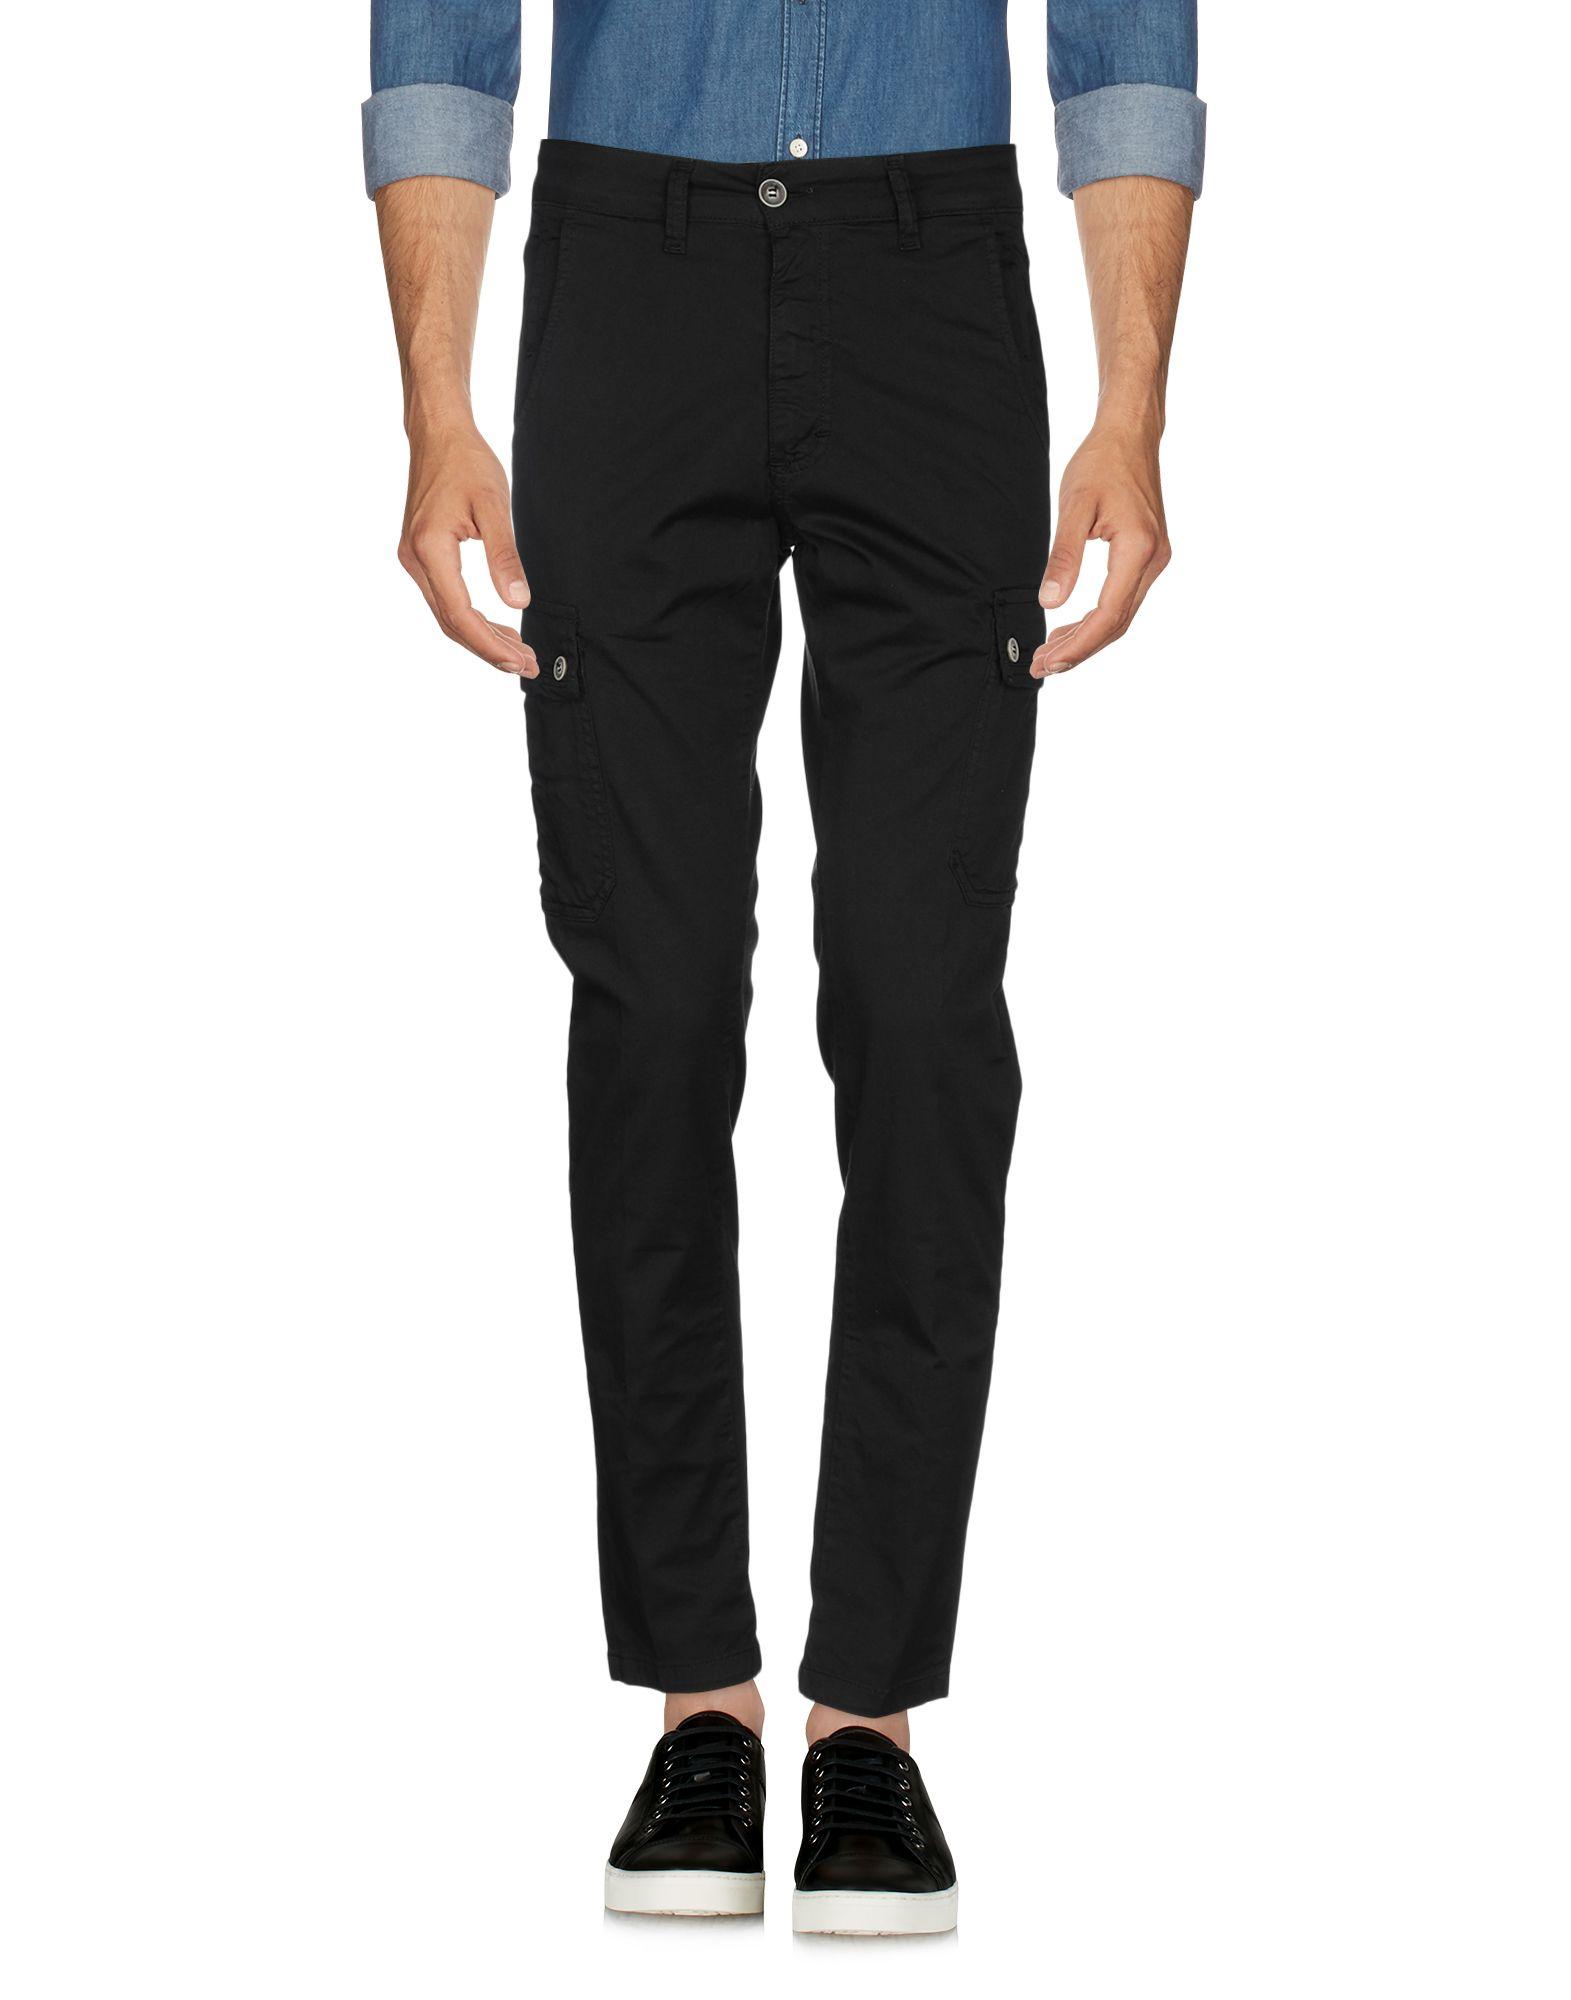 Squad² Leather Casual Pants in Black for Men - Lyst